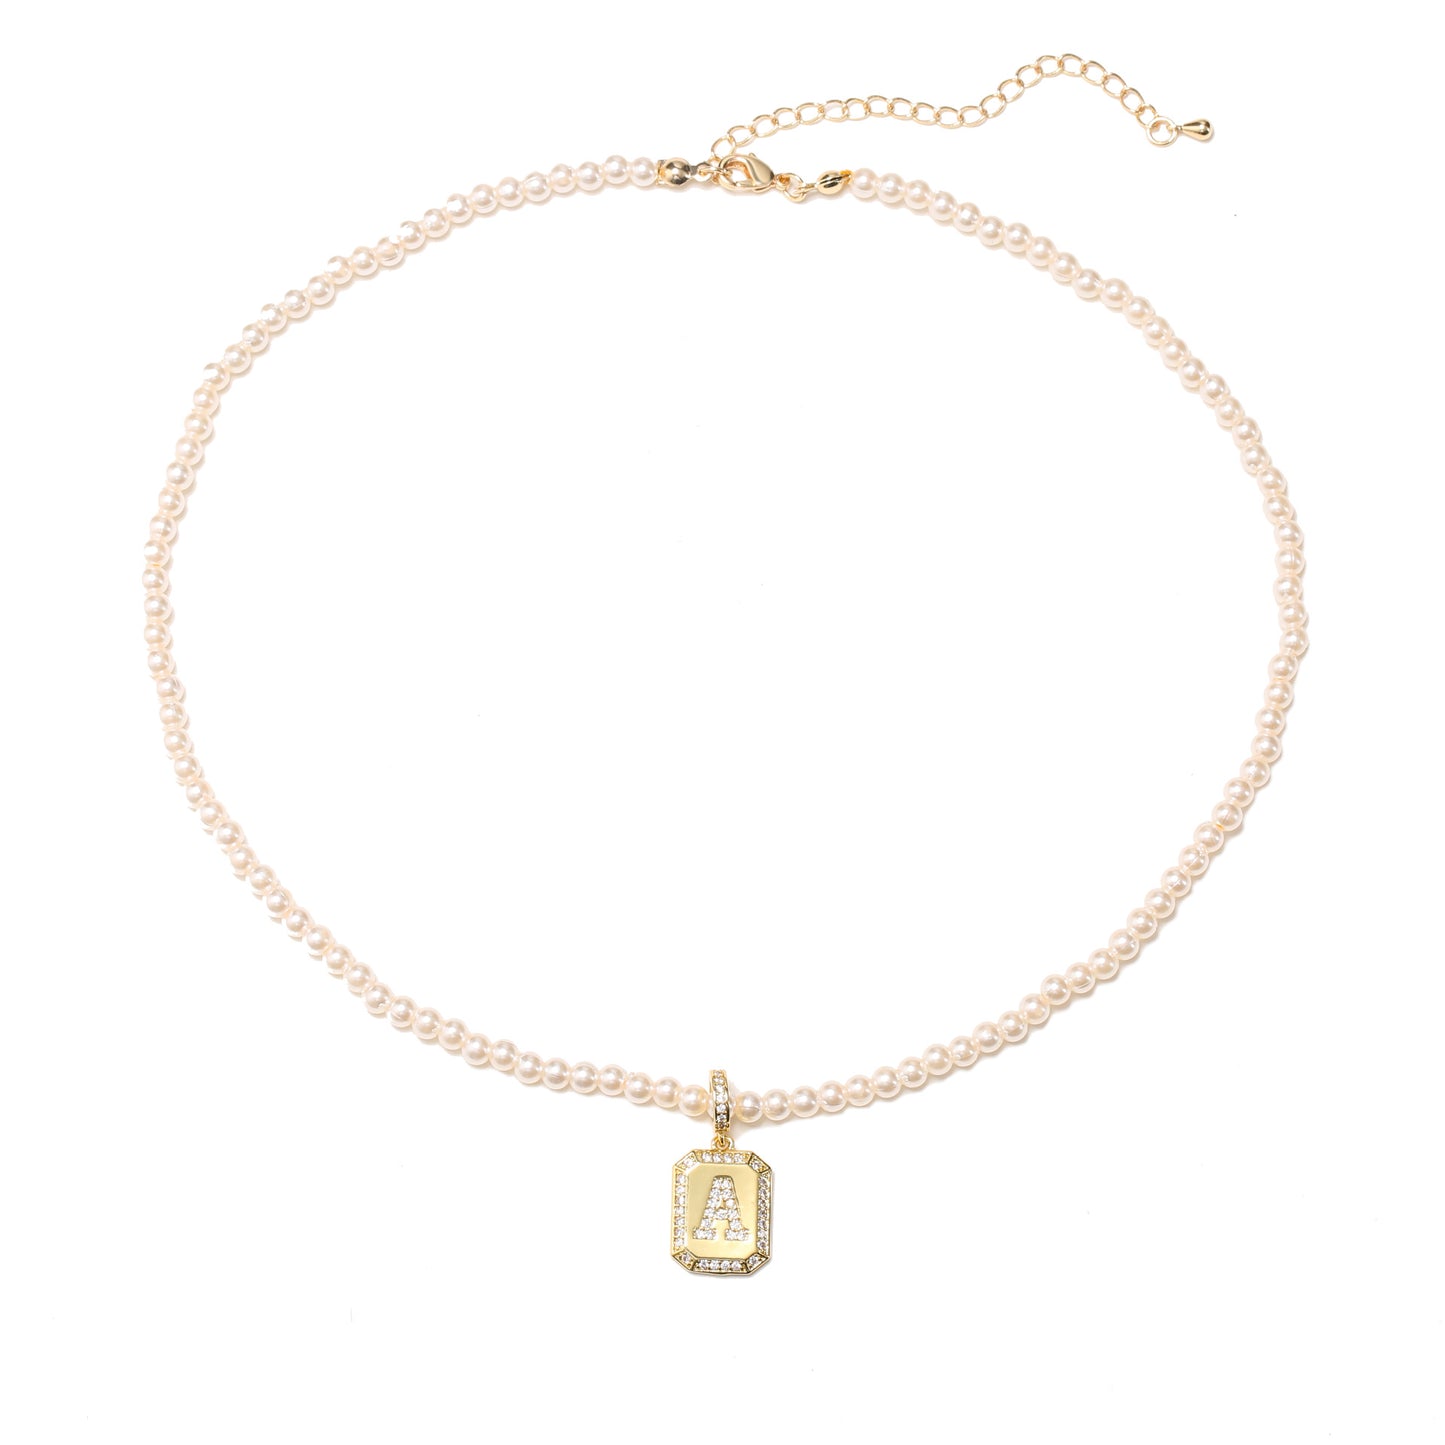 Pearl Initial Necklace Dainty Initial Necklace Initial Jewelry For Women